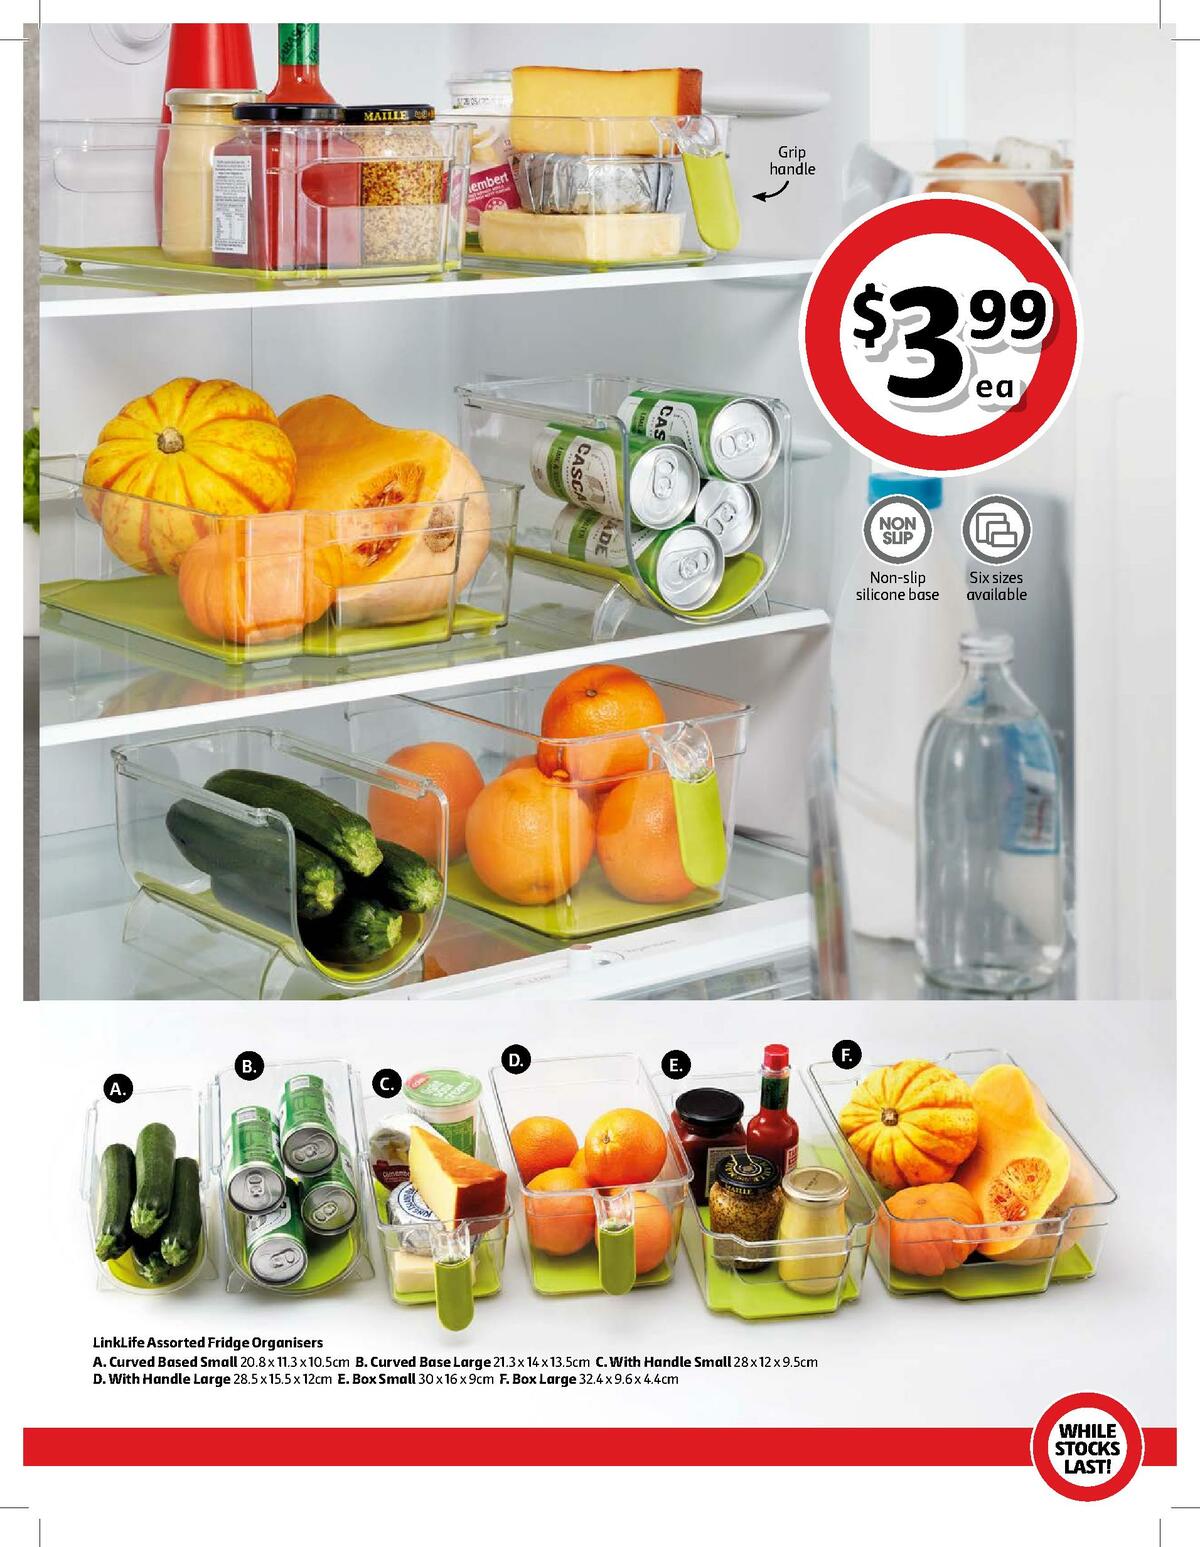 Coles Best Buys Catalogues from 26 June